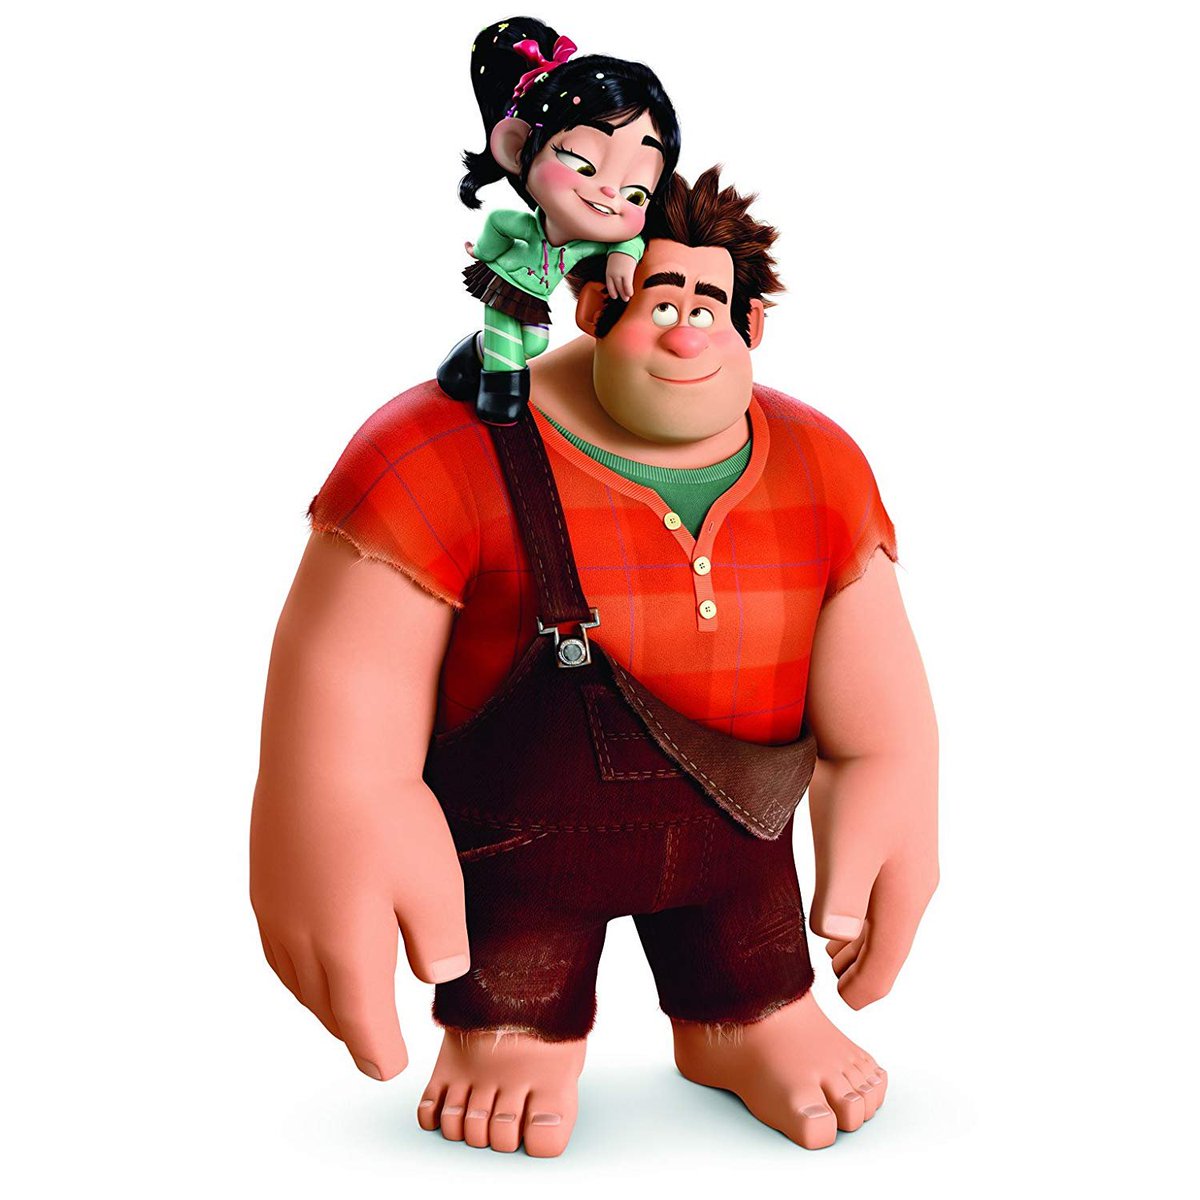 Wreck-It Ralph. Normally don't watch these kind of movies but it was just an amazing movie, great story and some great humor. Just makes your hart melt, probably my 2nd favorite animation disney movie behind 'Coco' 